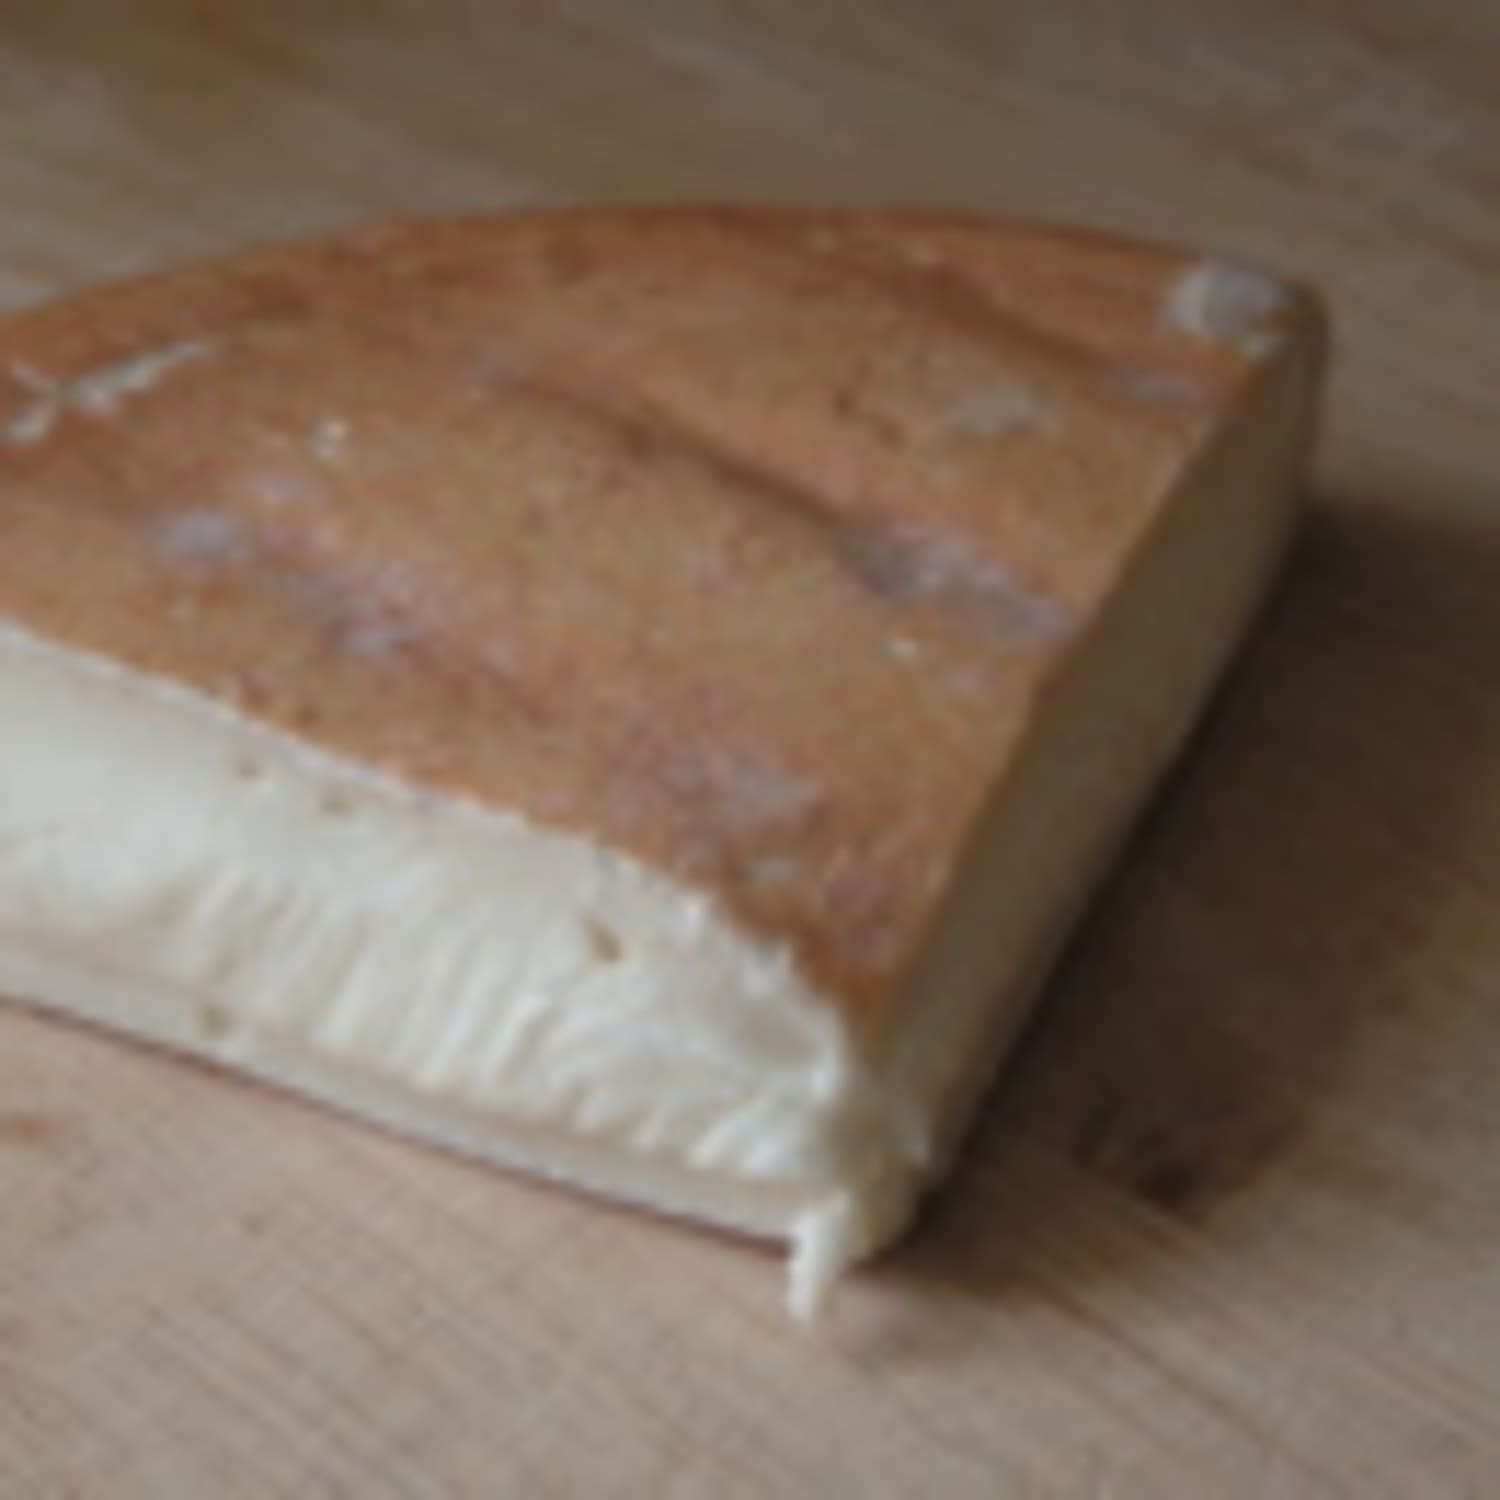 The history of Reblochon cheese and how to eat it